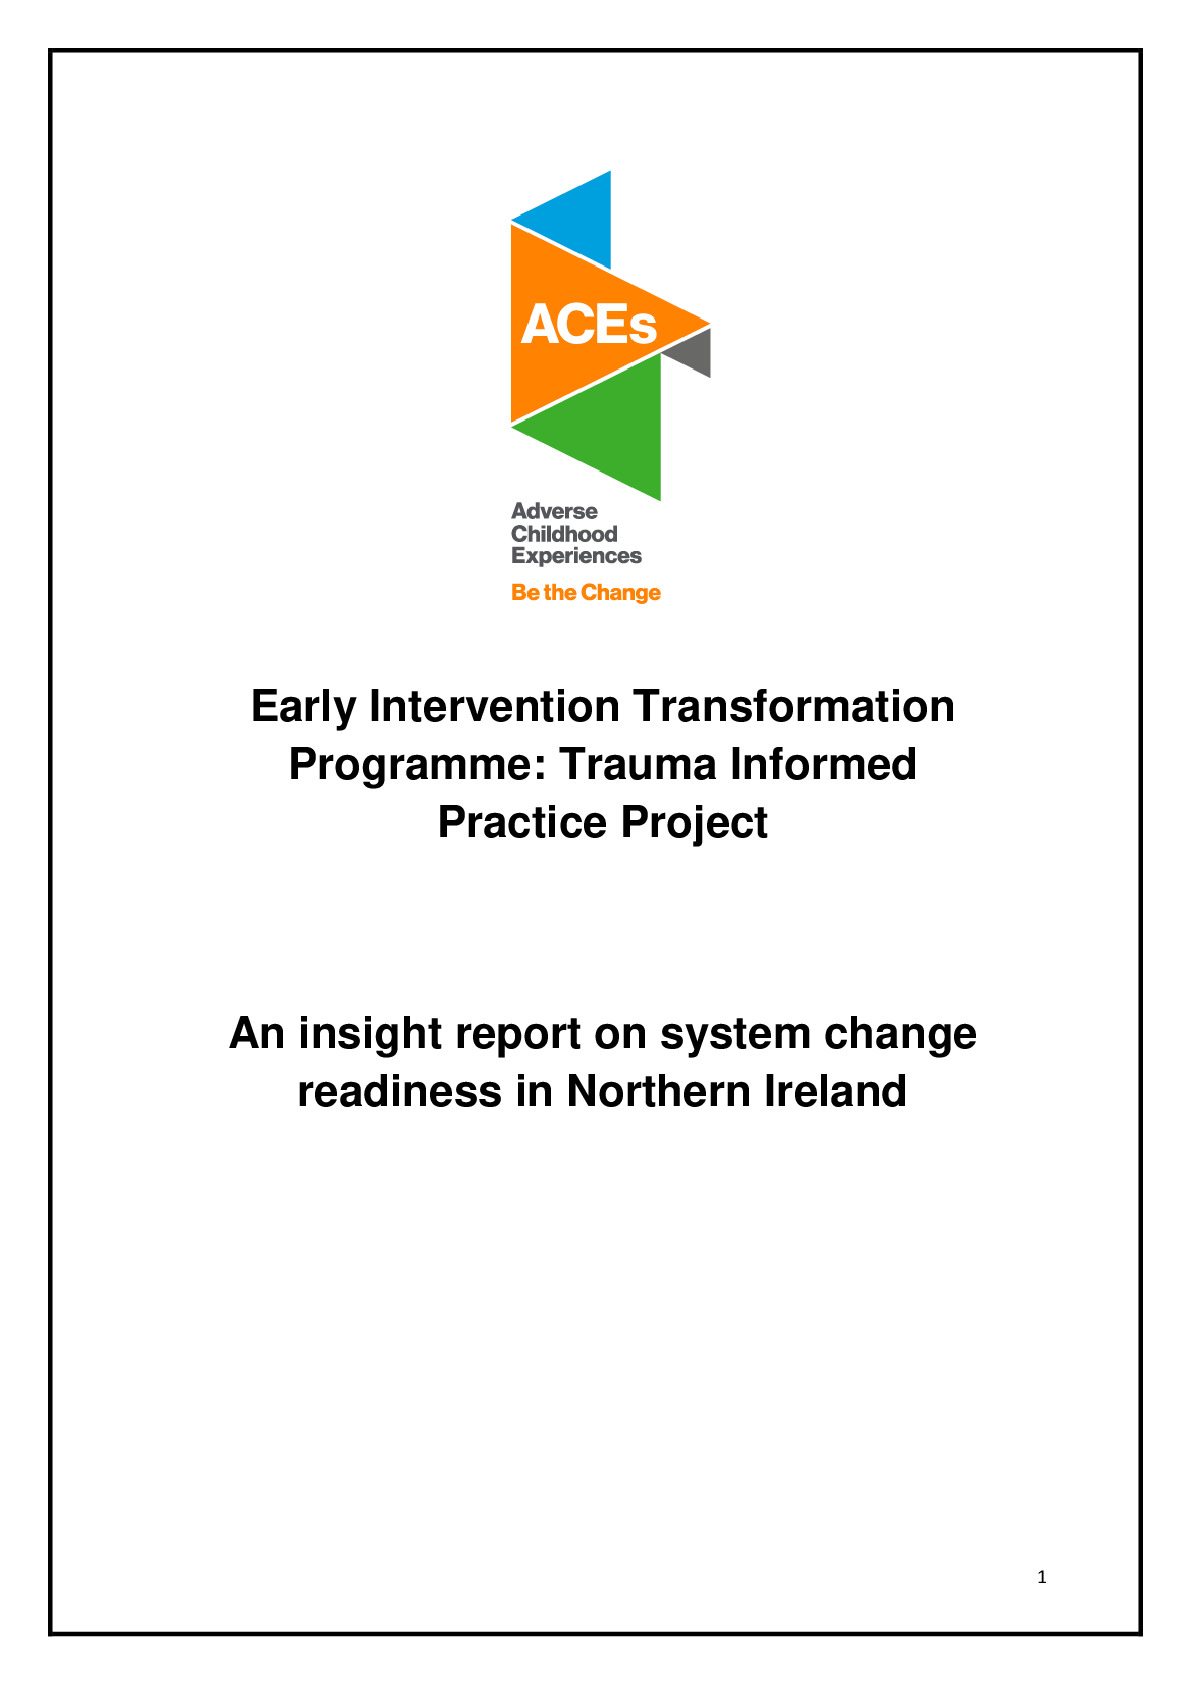 EITP Trauma Informed Practice Systems Change Regional Insight Report Final